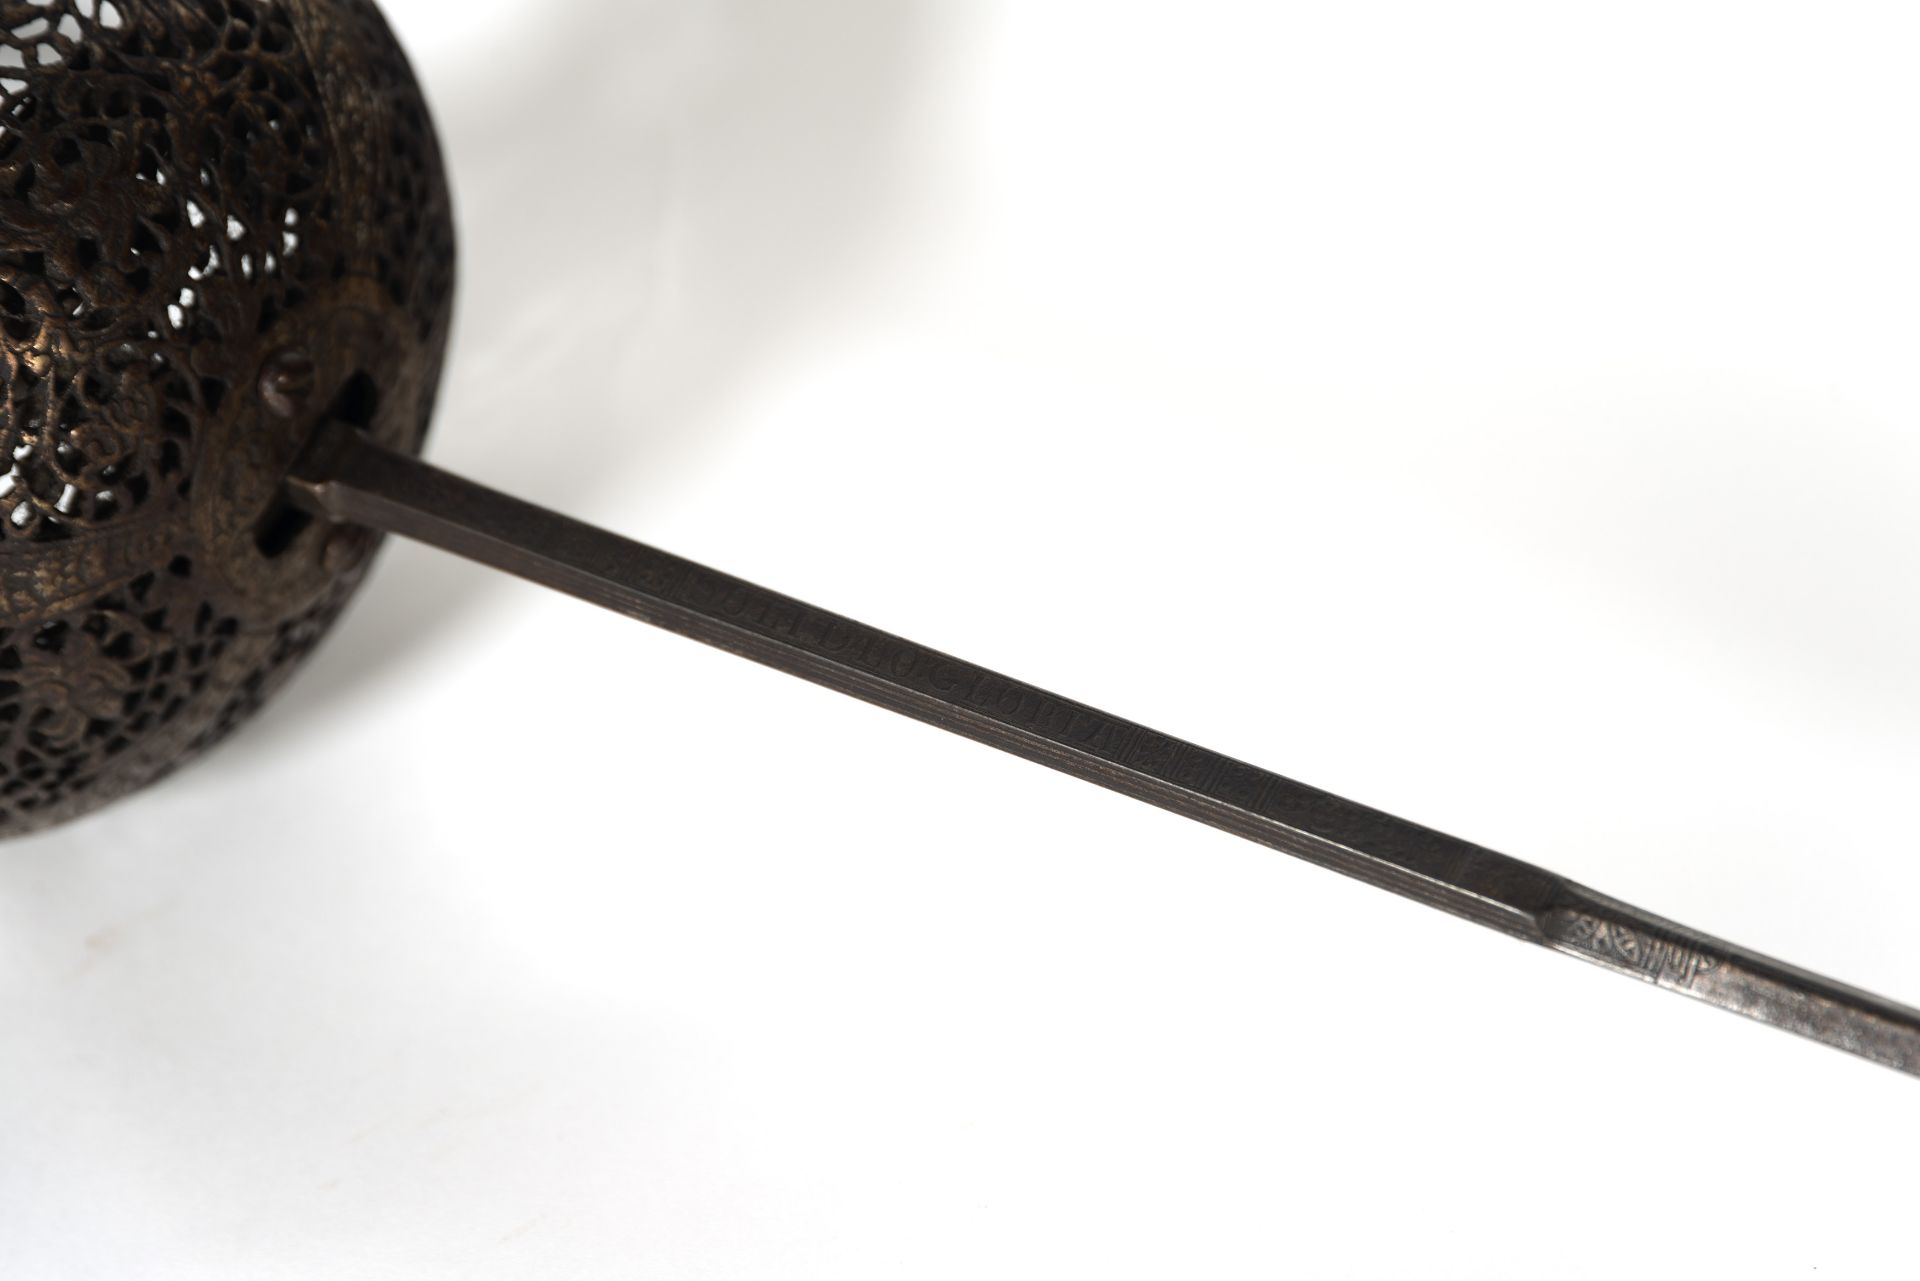 Old Spanish sword, with possibly later blade, 19th - early 20th centuries, Spain - Image 3 of 5